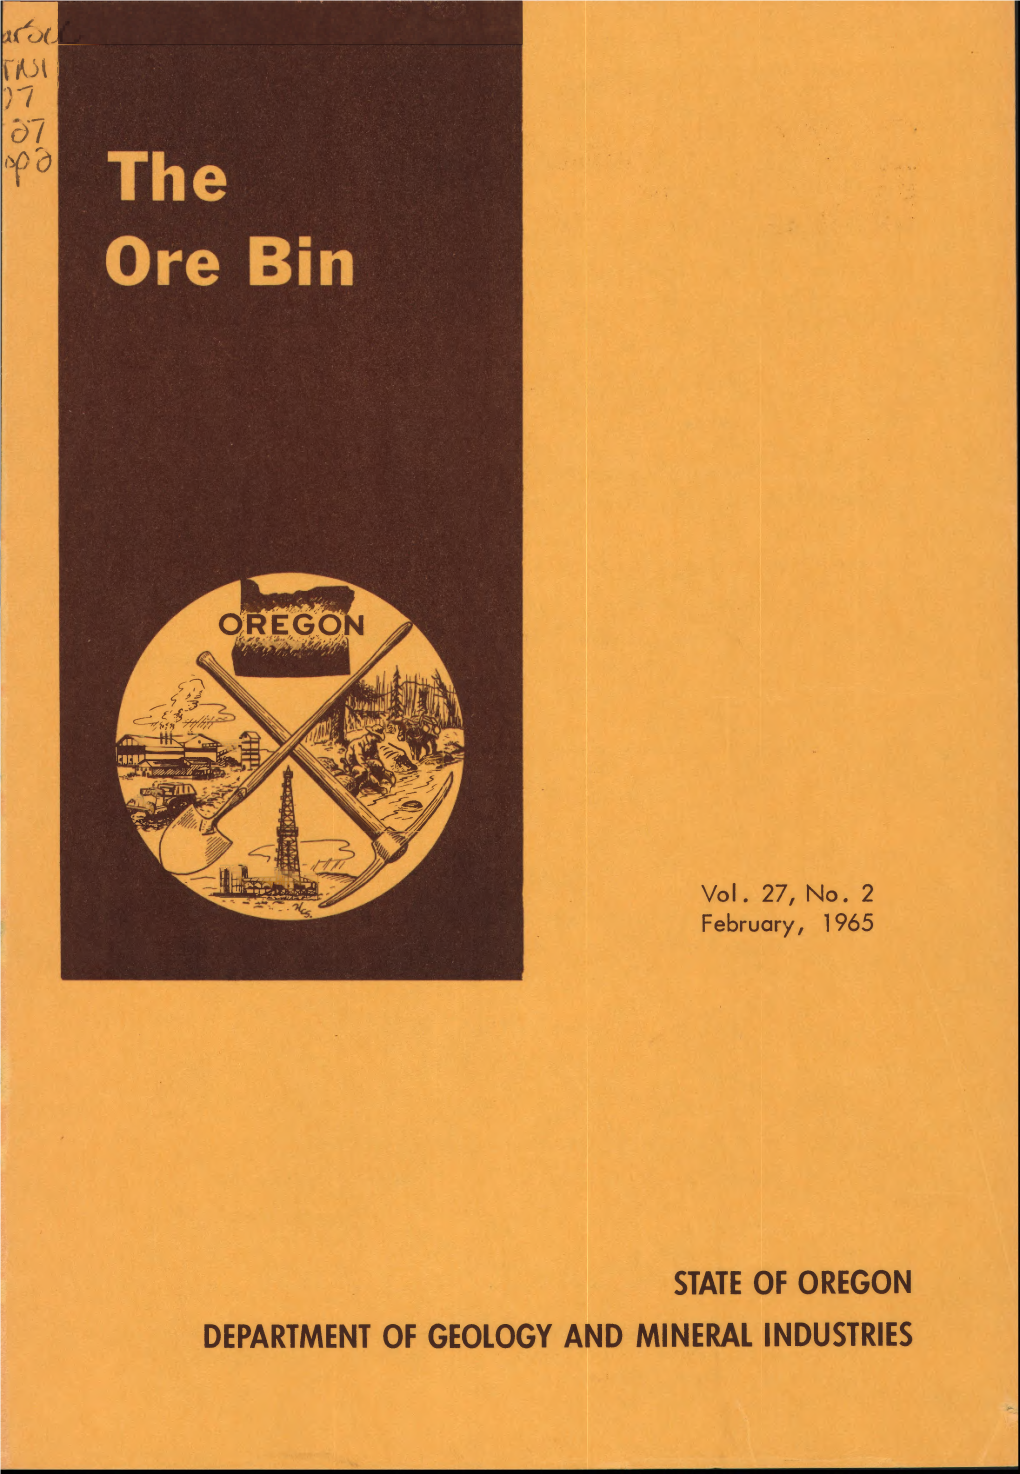 STATE of OREGON DEPARTMENT of GEOLOGY and MINERAL INDUSTRIES • the Ore Bin •